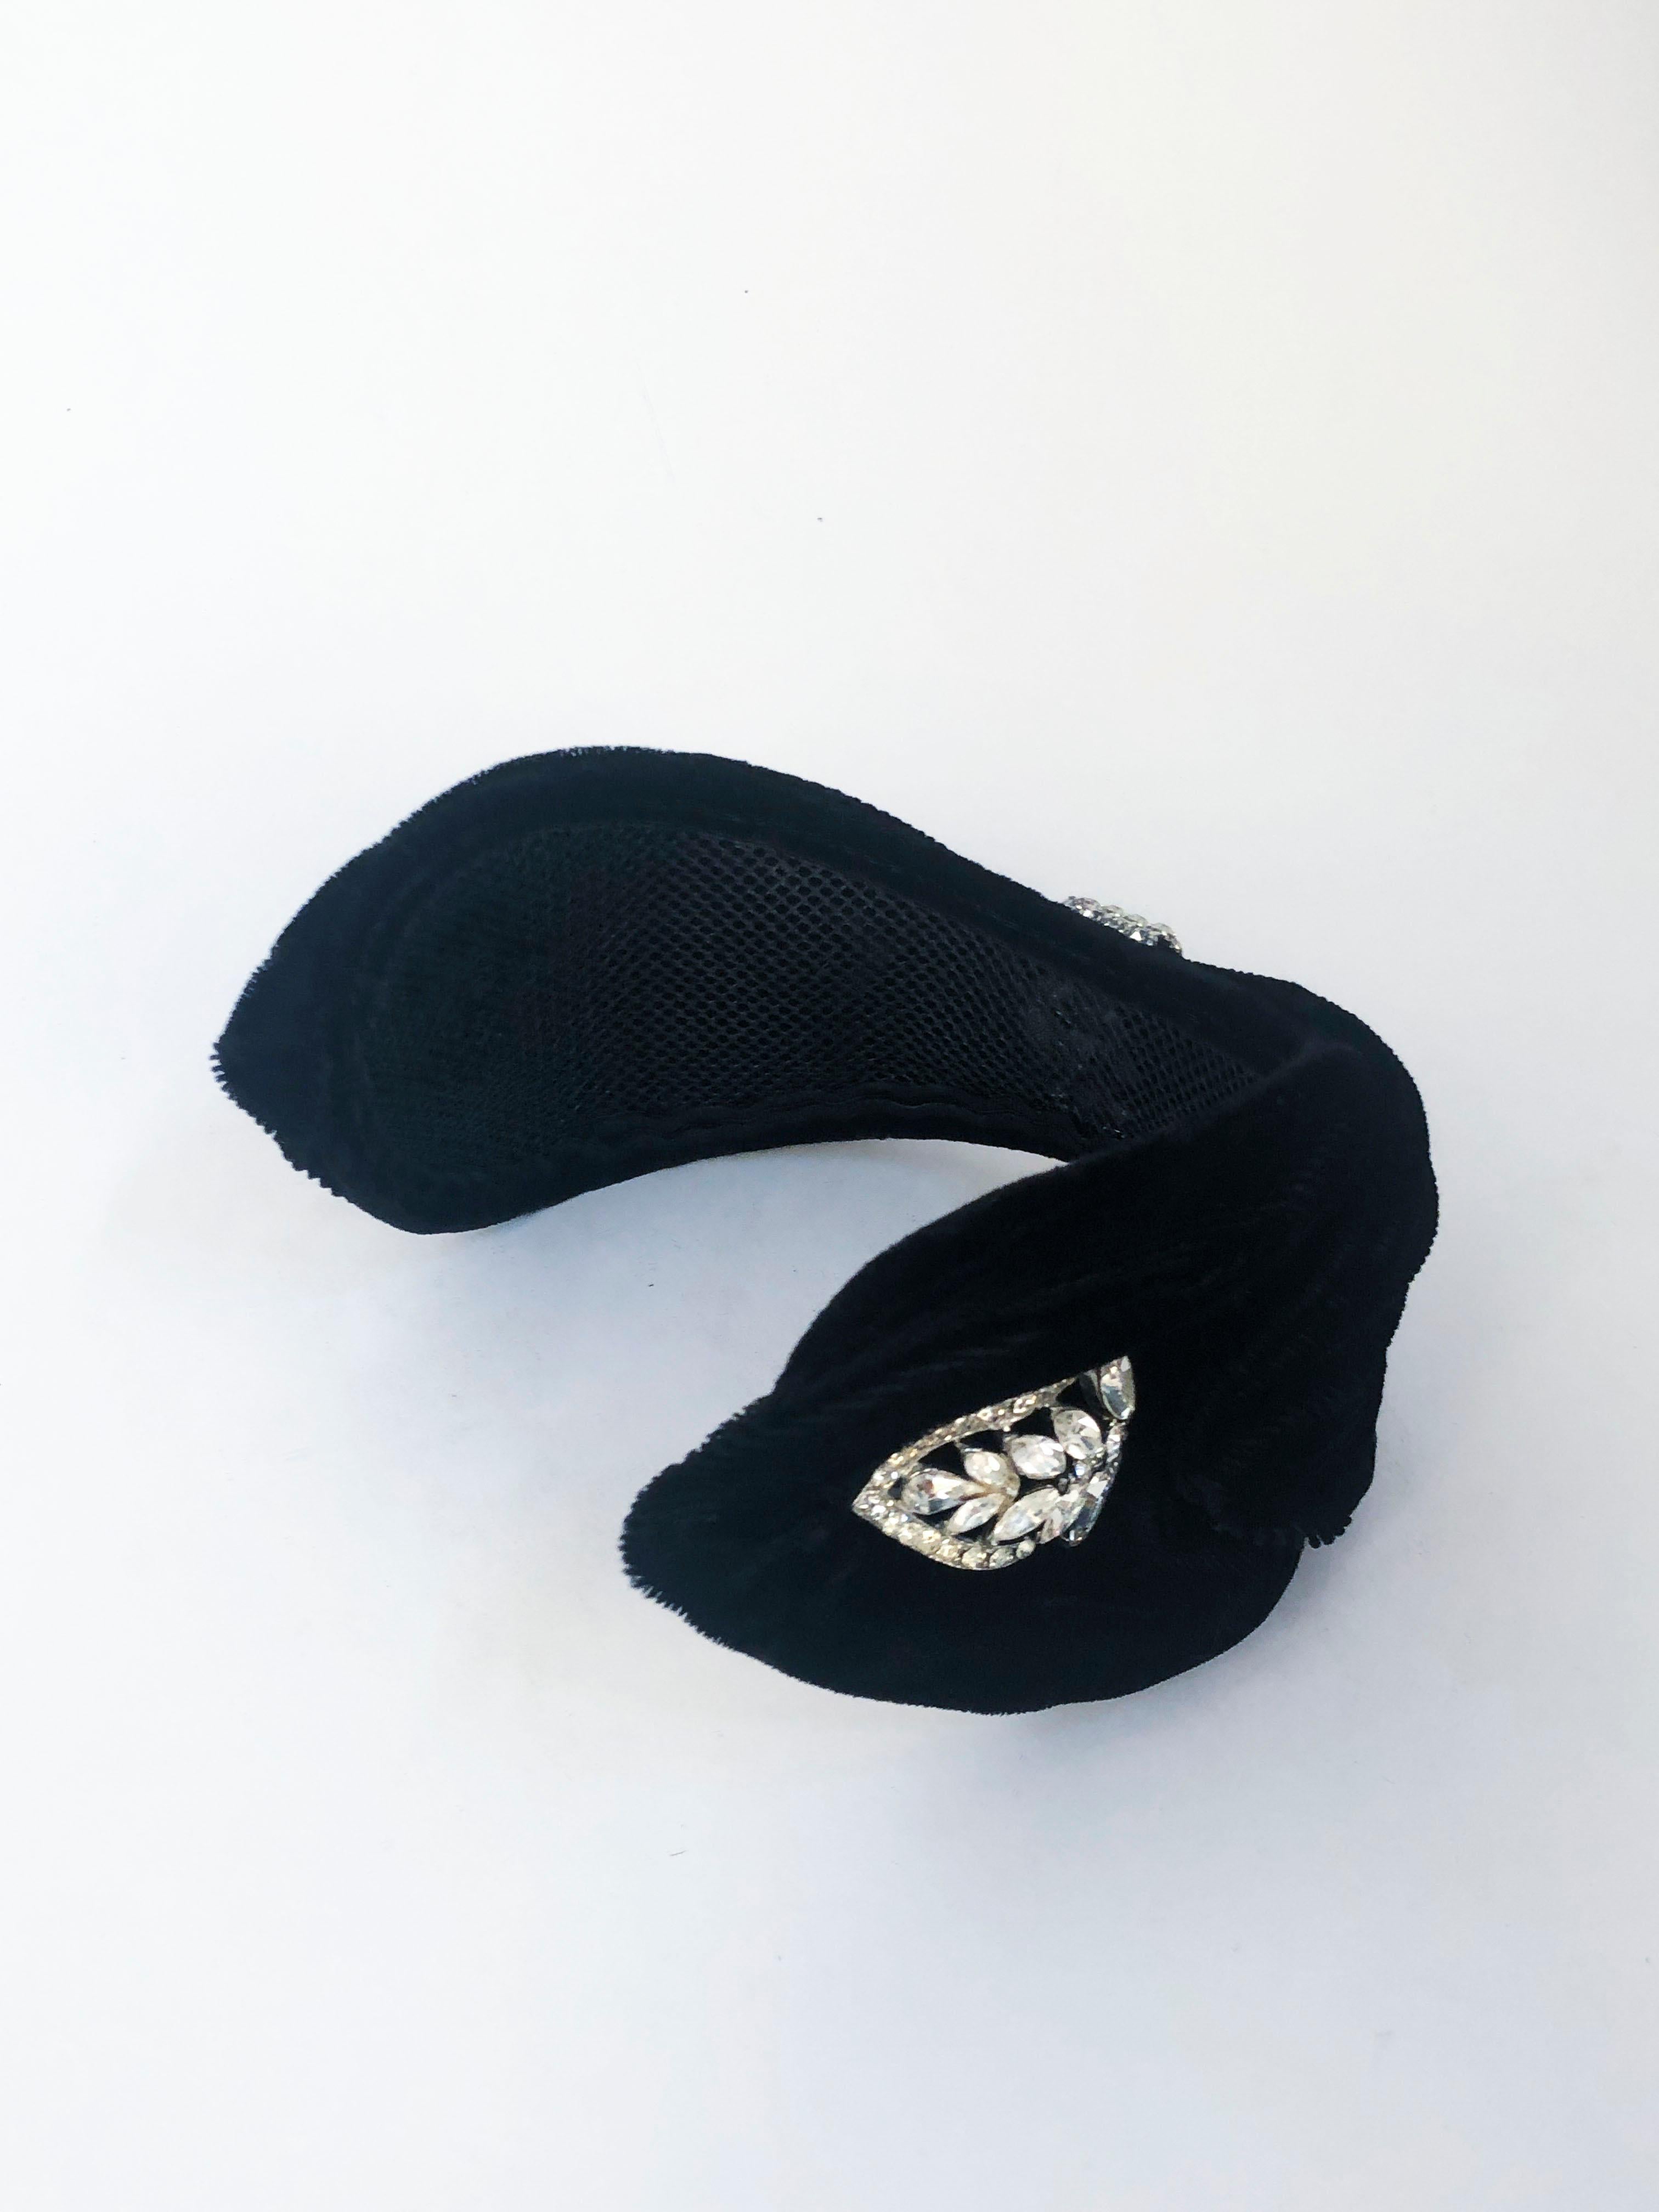 1950's Black Velvet Cocktail Hat with Rhinestone Accents 3